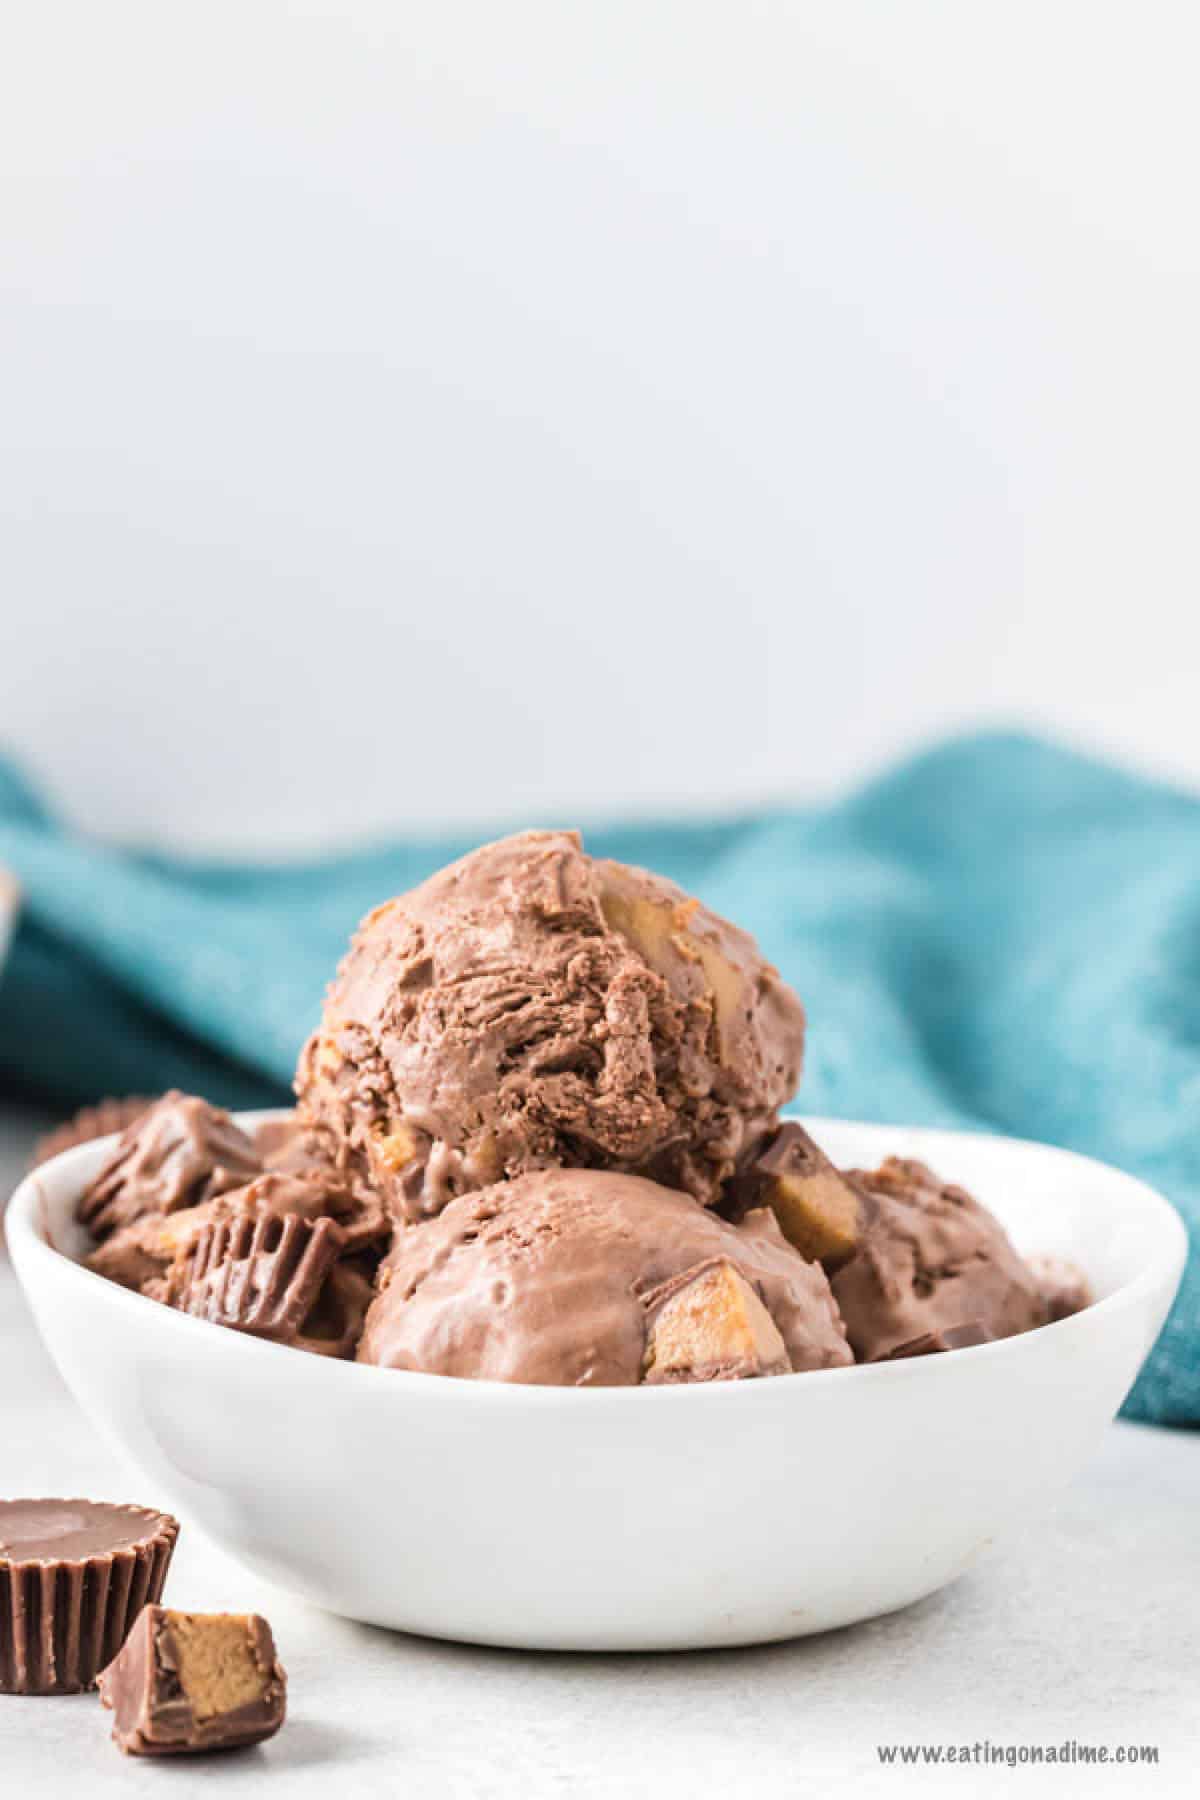 Chocolate peanut butter ice cream in a bowl